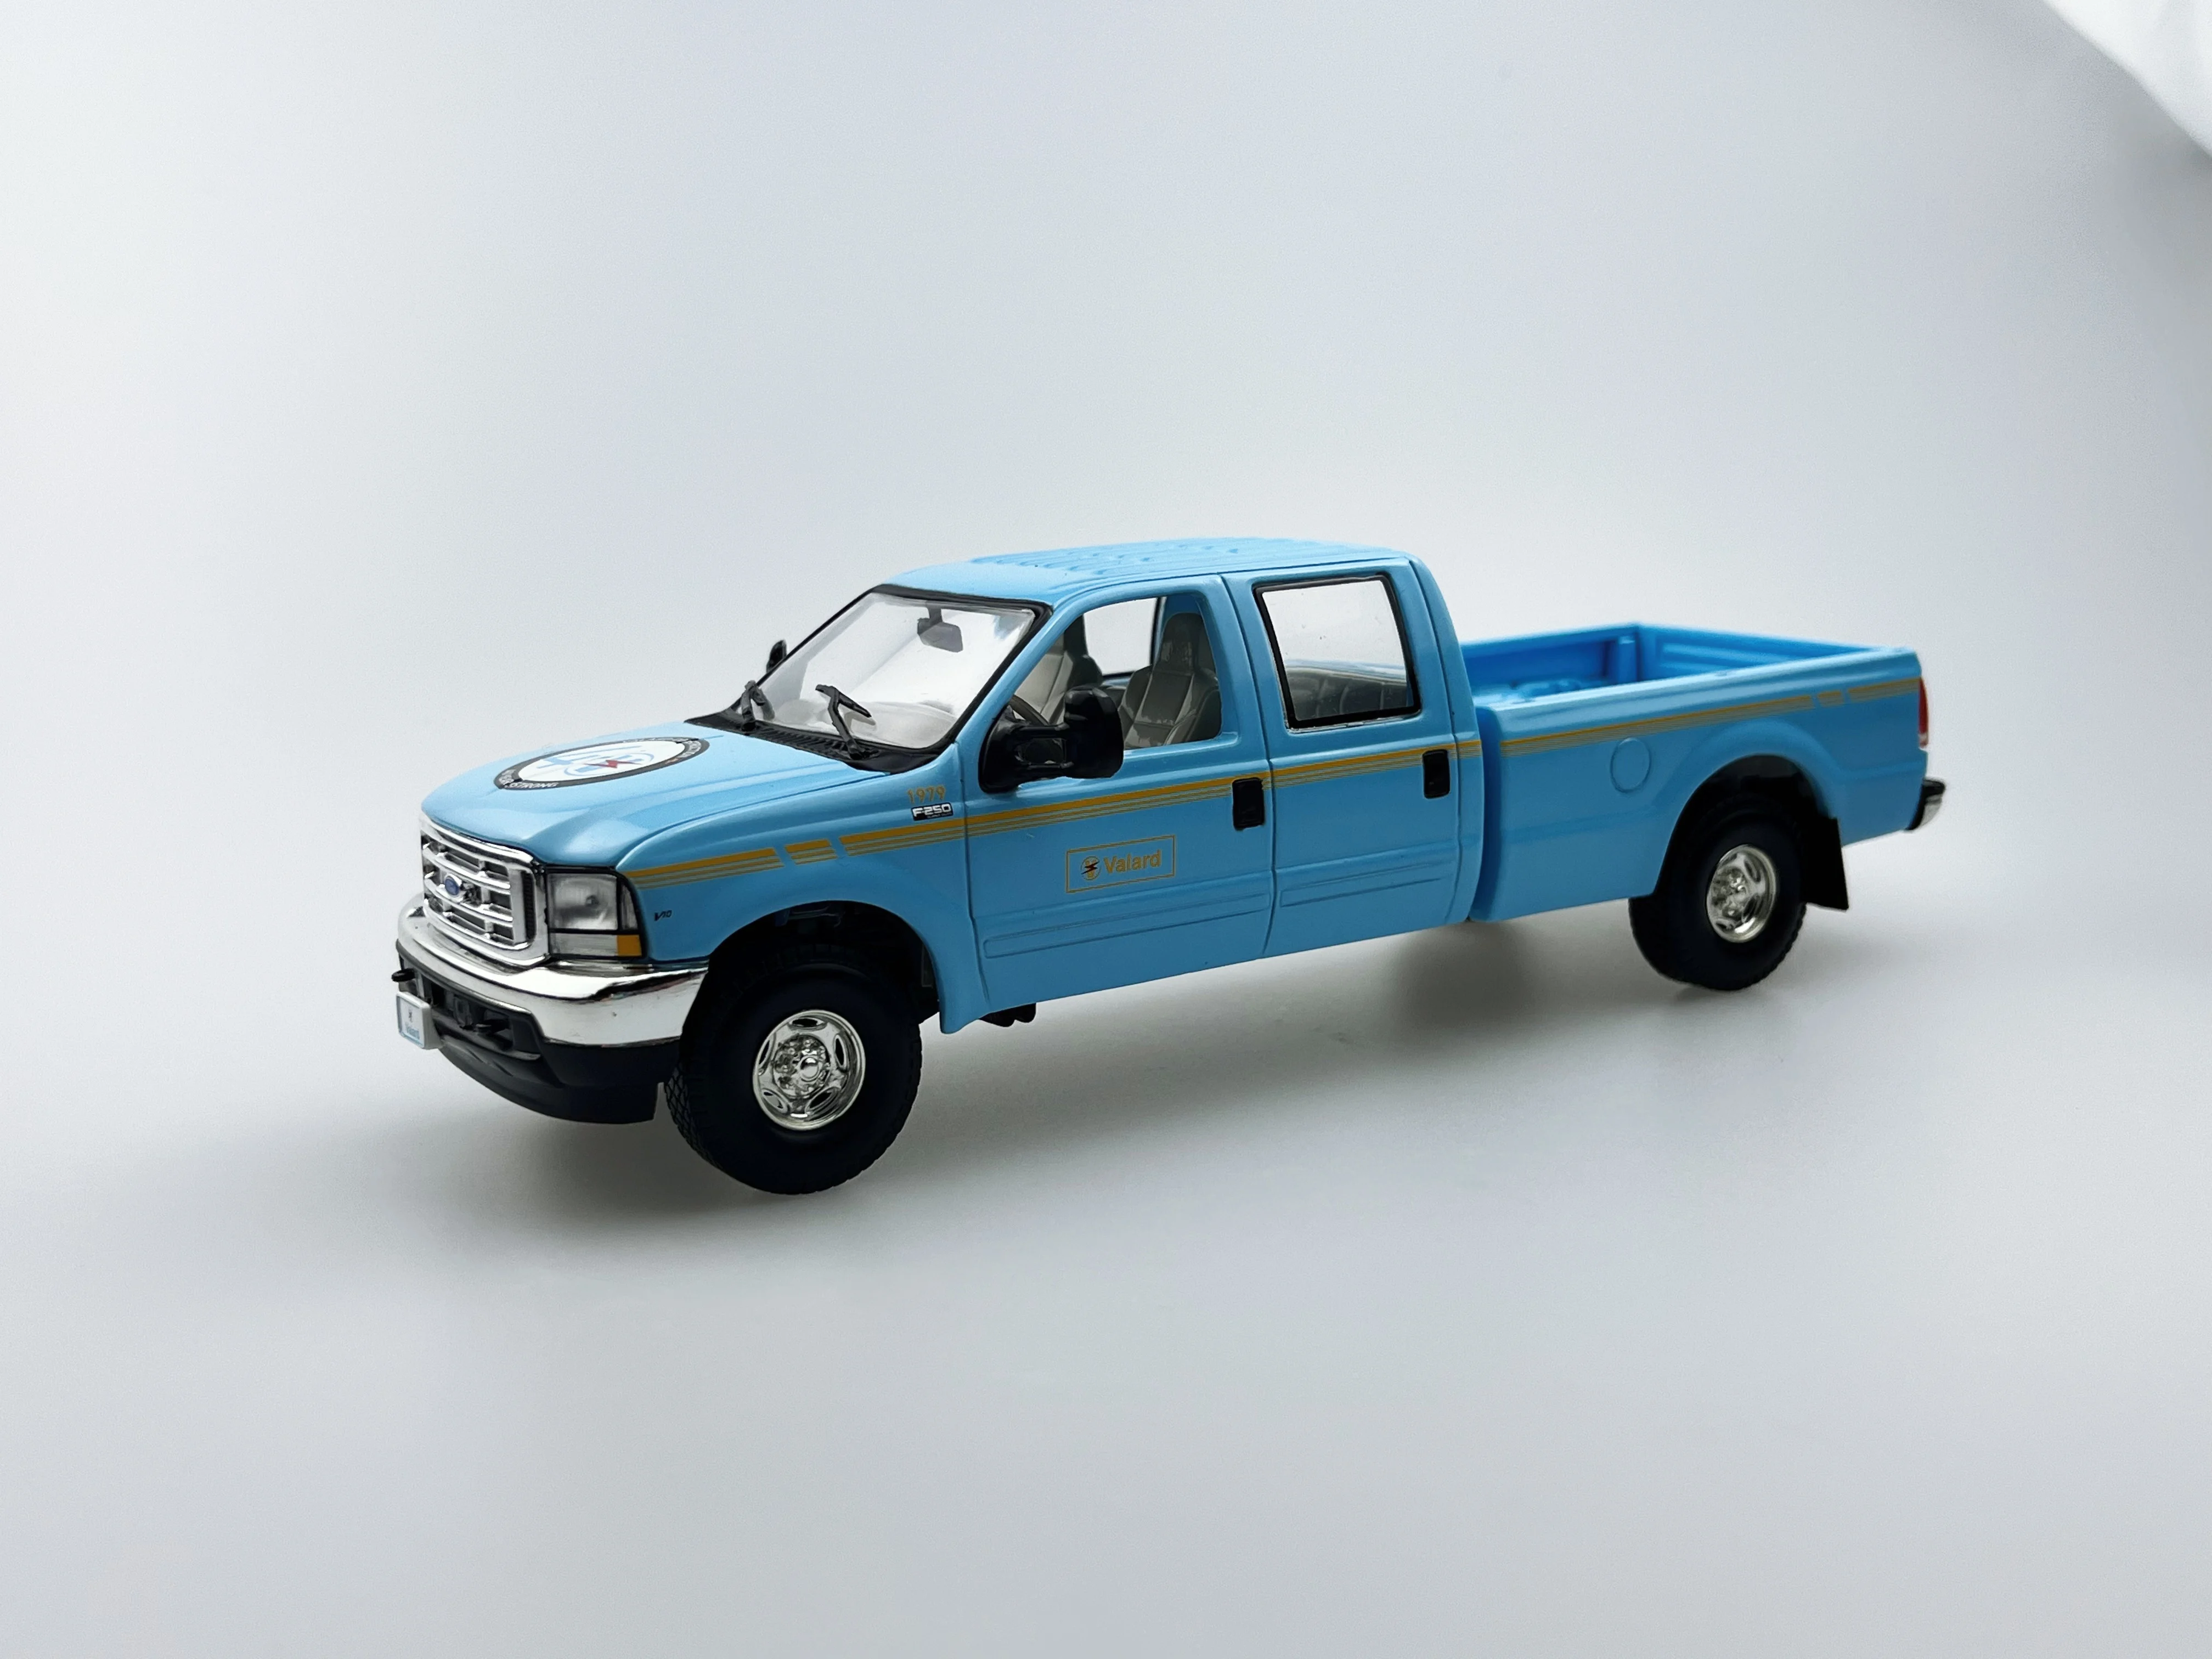 

Diecast 1/34 Scale Ford F-250 Alloy Pickup Truck Car Model Collectible Toy Gift Souvenir Display Ornament